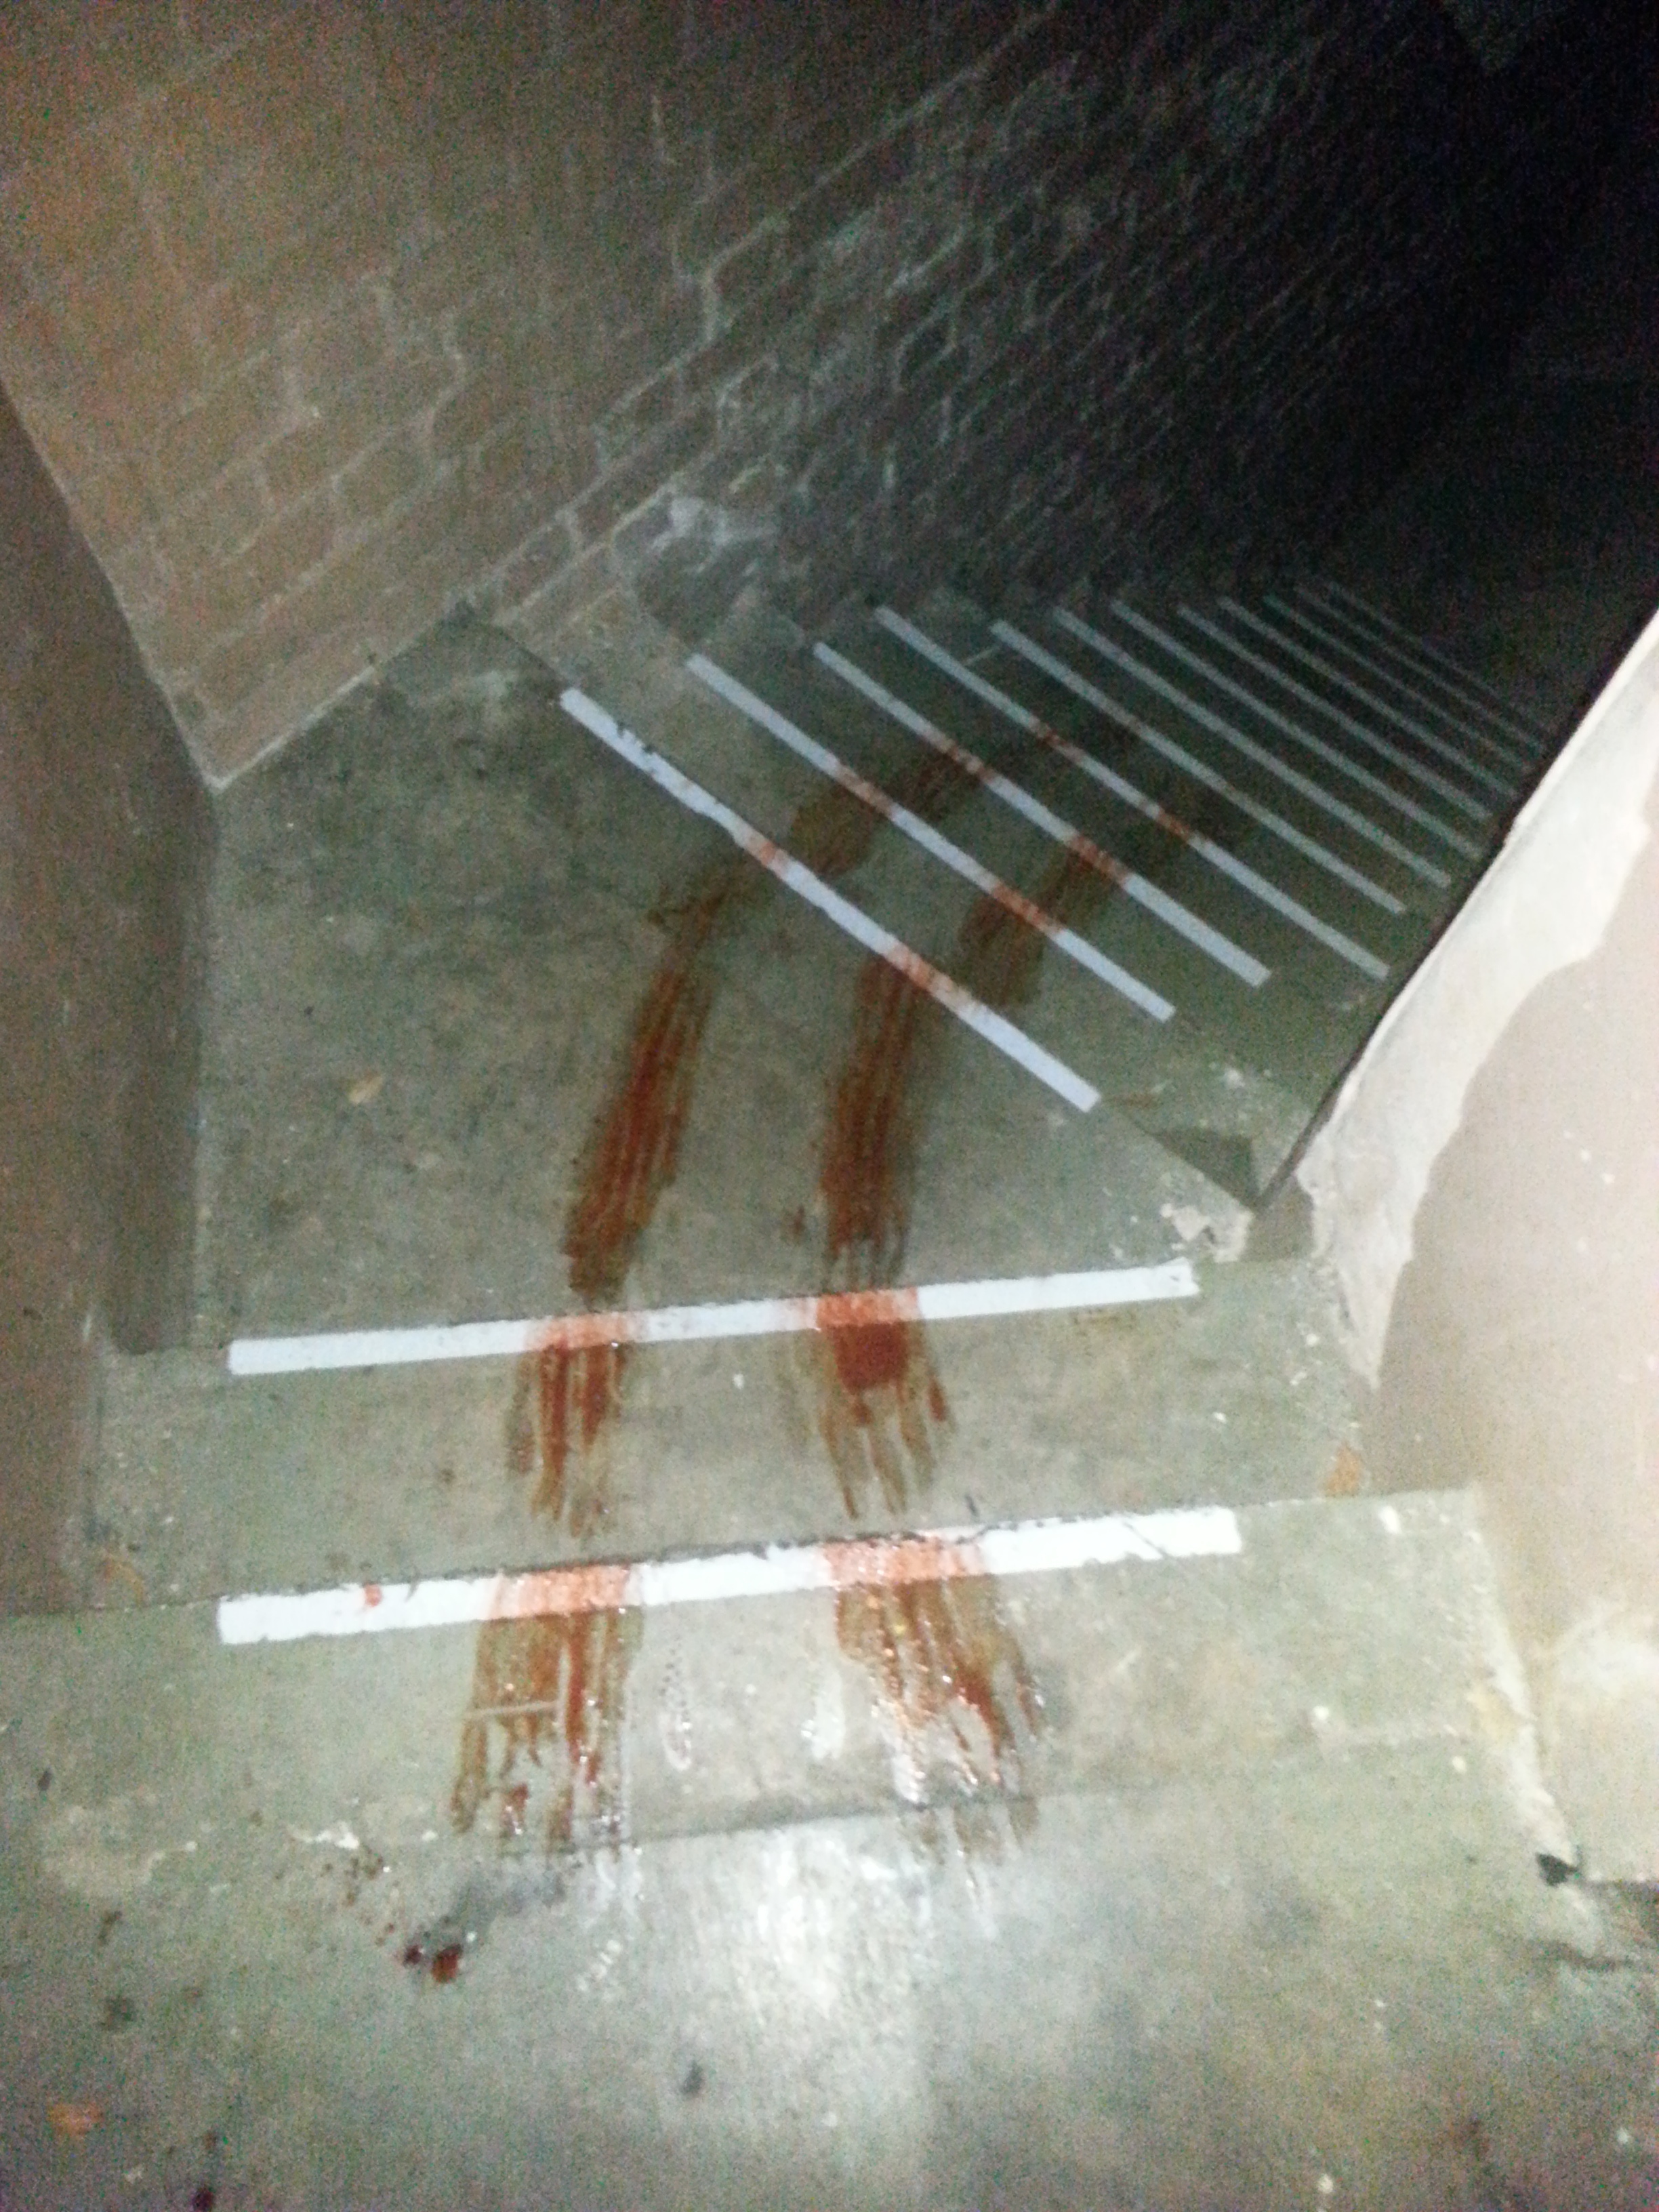 Fake blood hand prints leading down to the basement. 